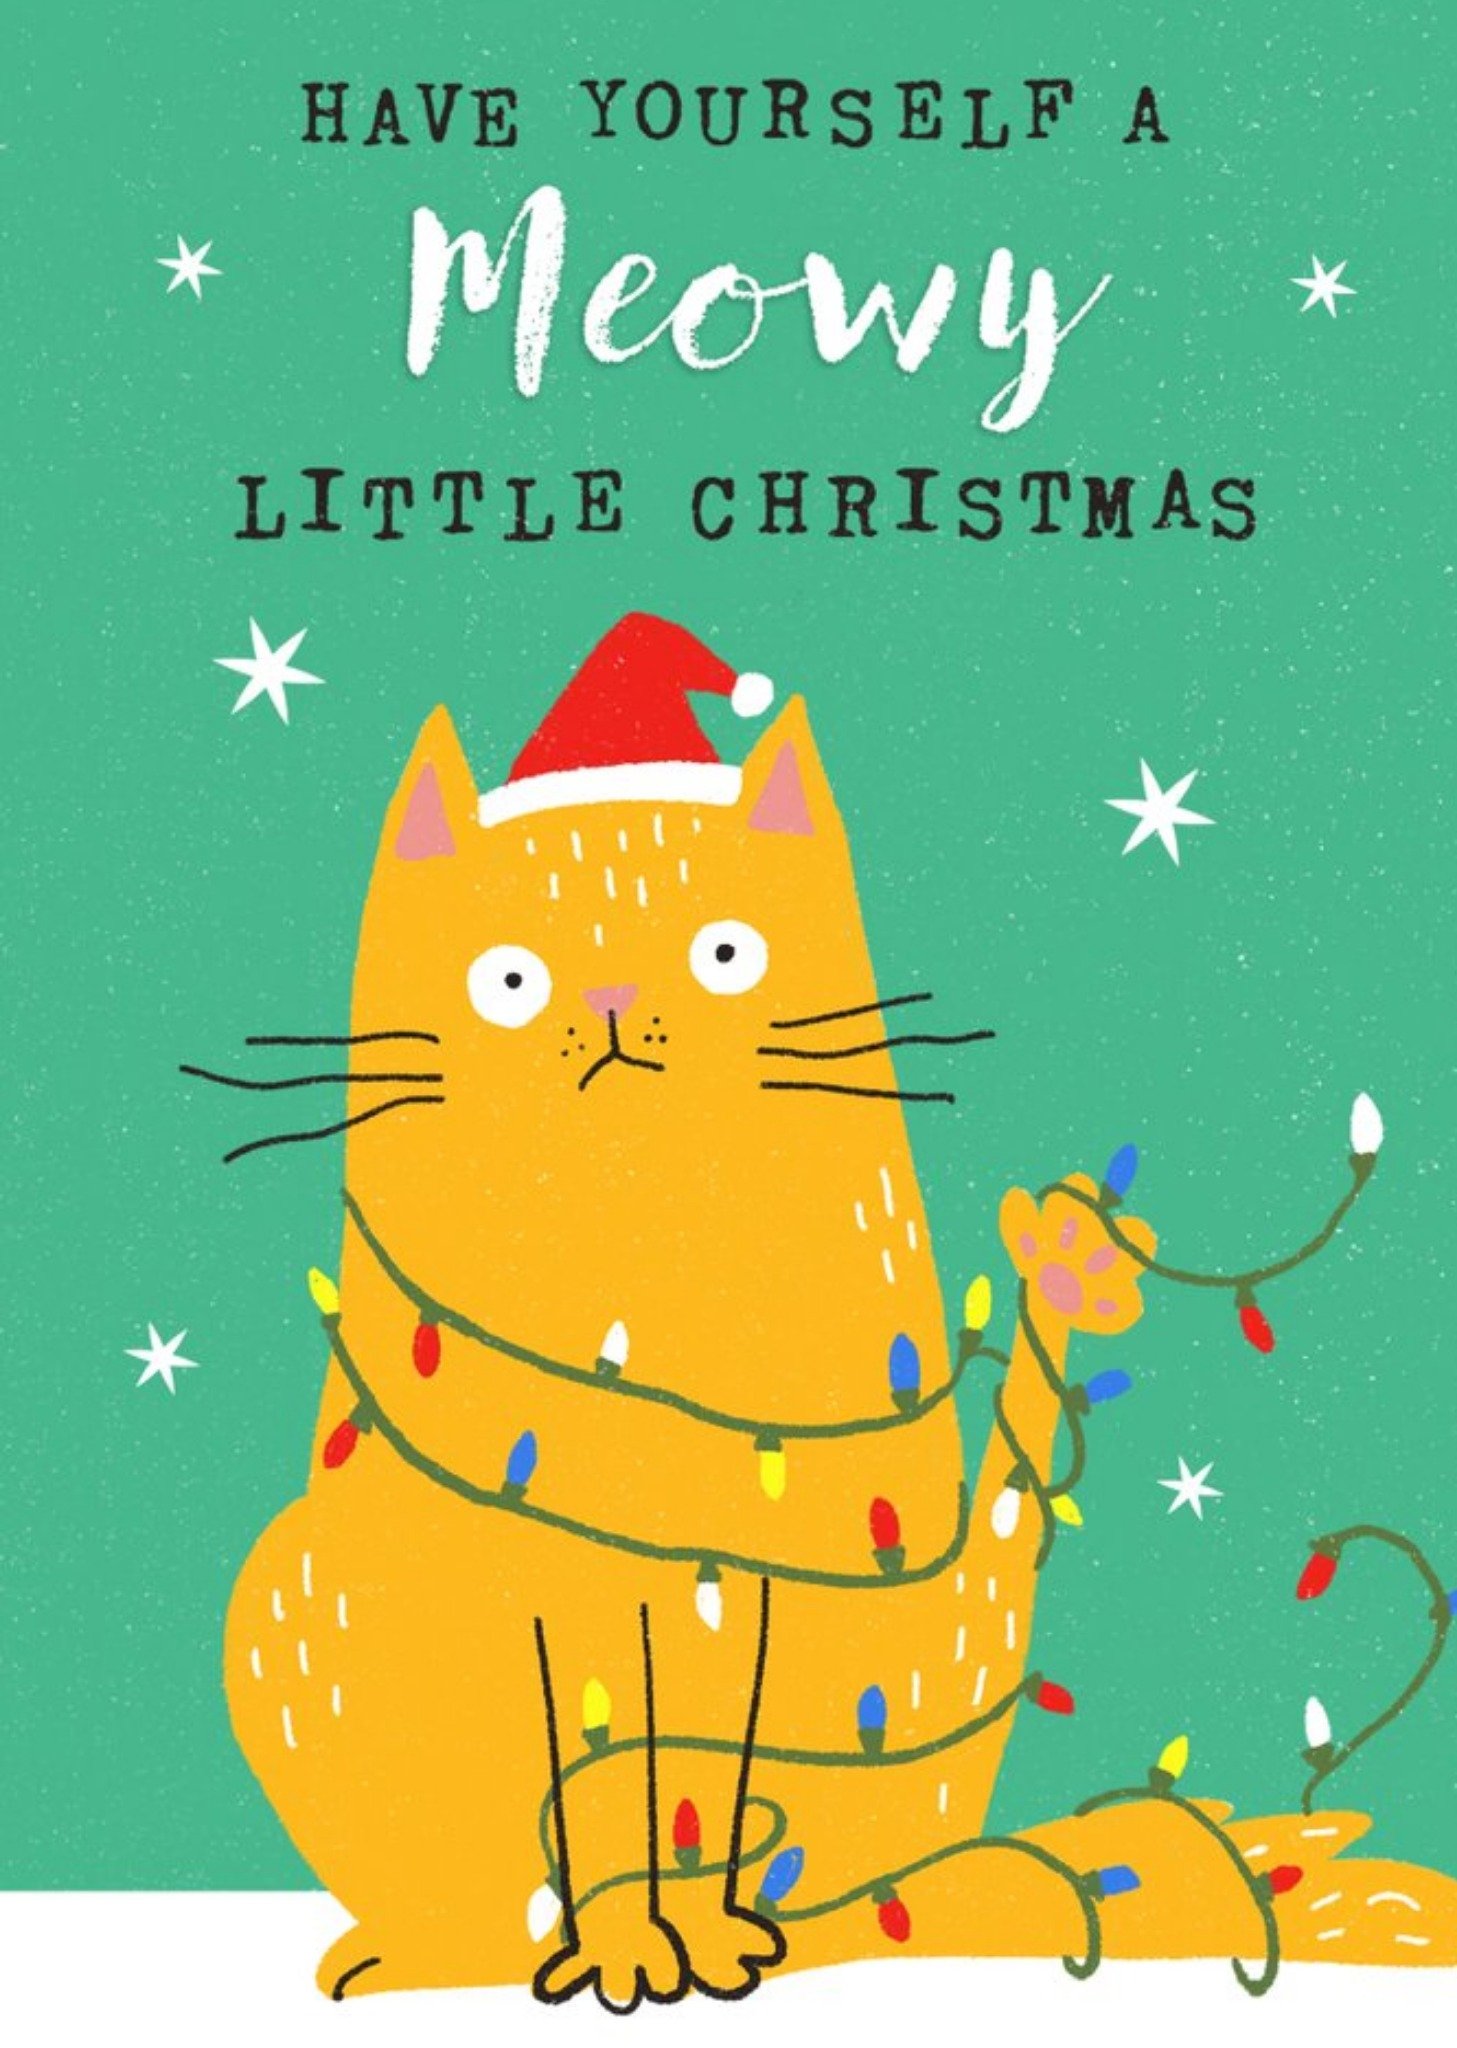 Moonpig Illustration Of A Cat Tangled In Lights On A Green Background Christmas Card Ecard